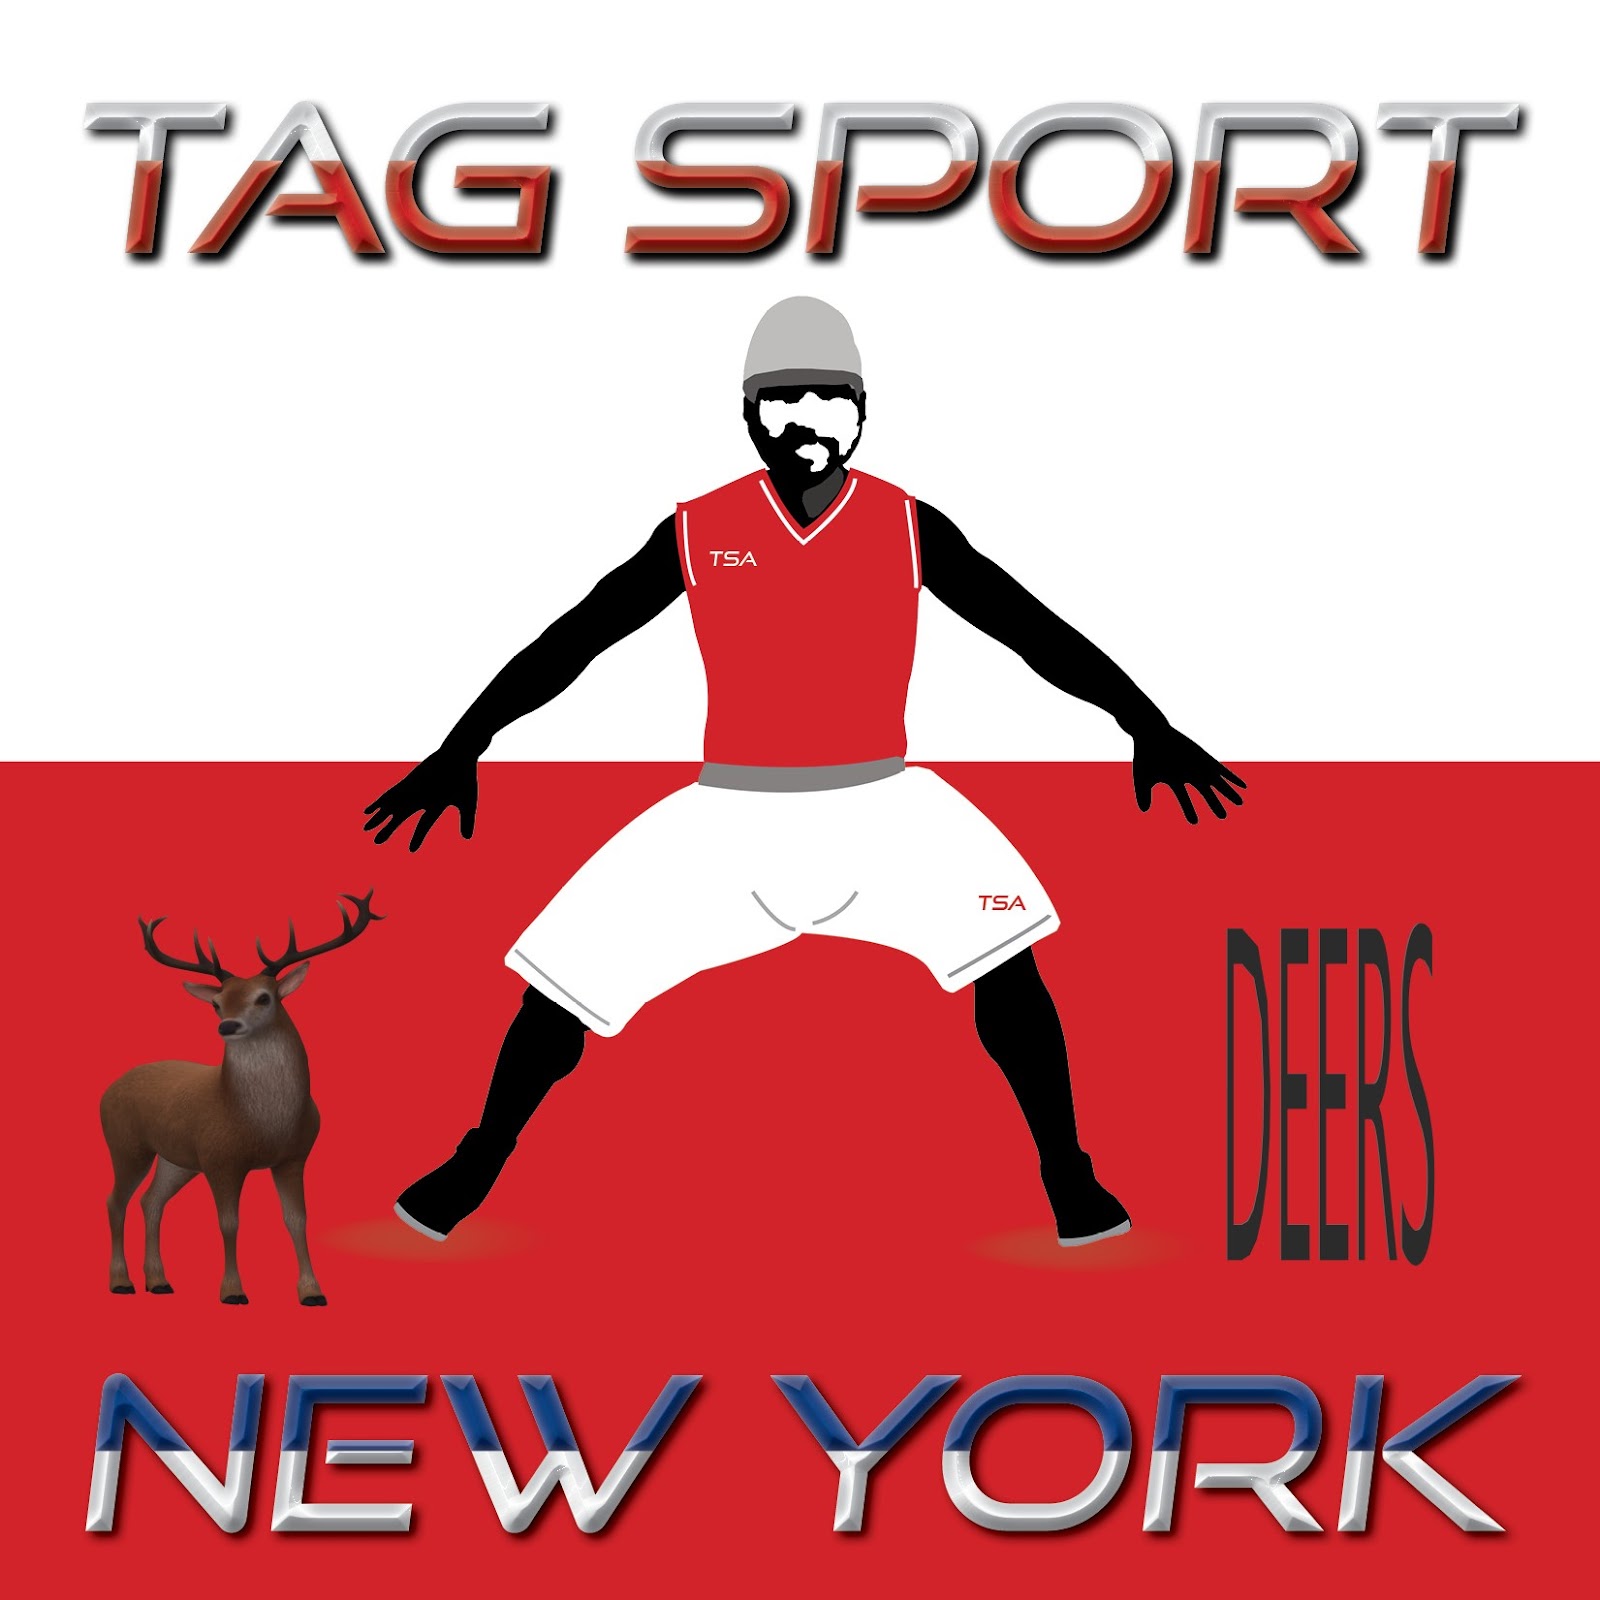 TAG SPORT NETWORK OF INTERNATIONAL ENTERTAINMENTS